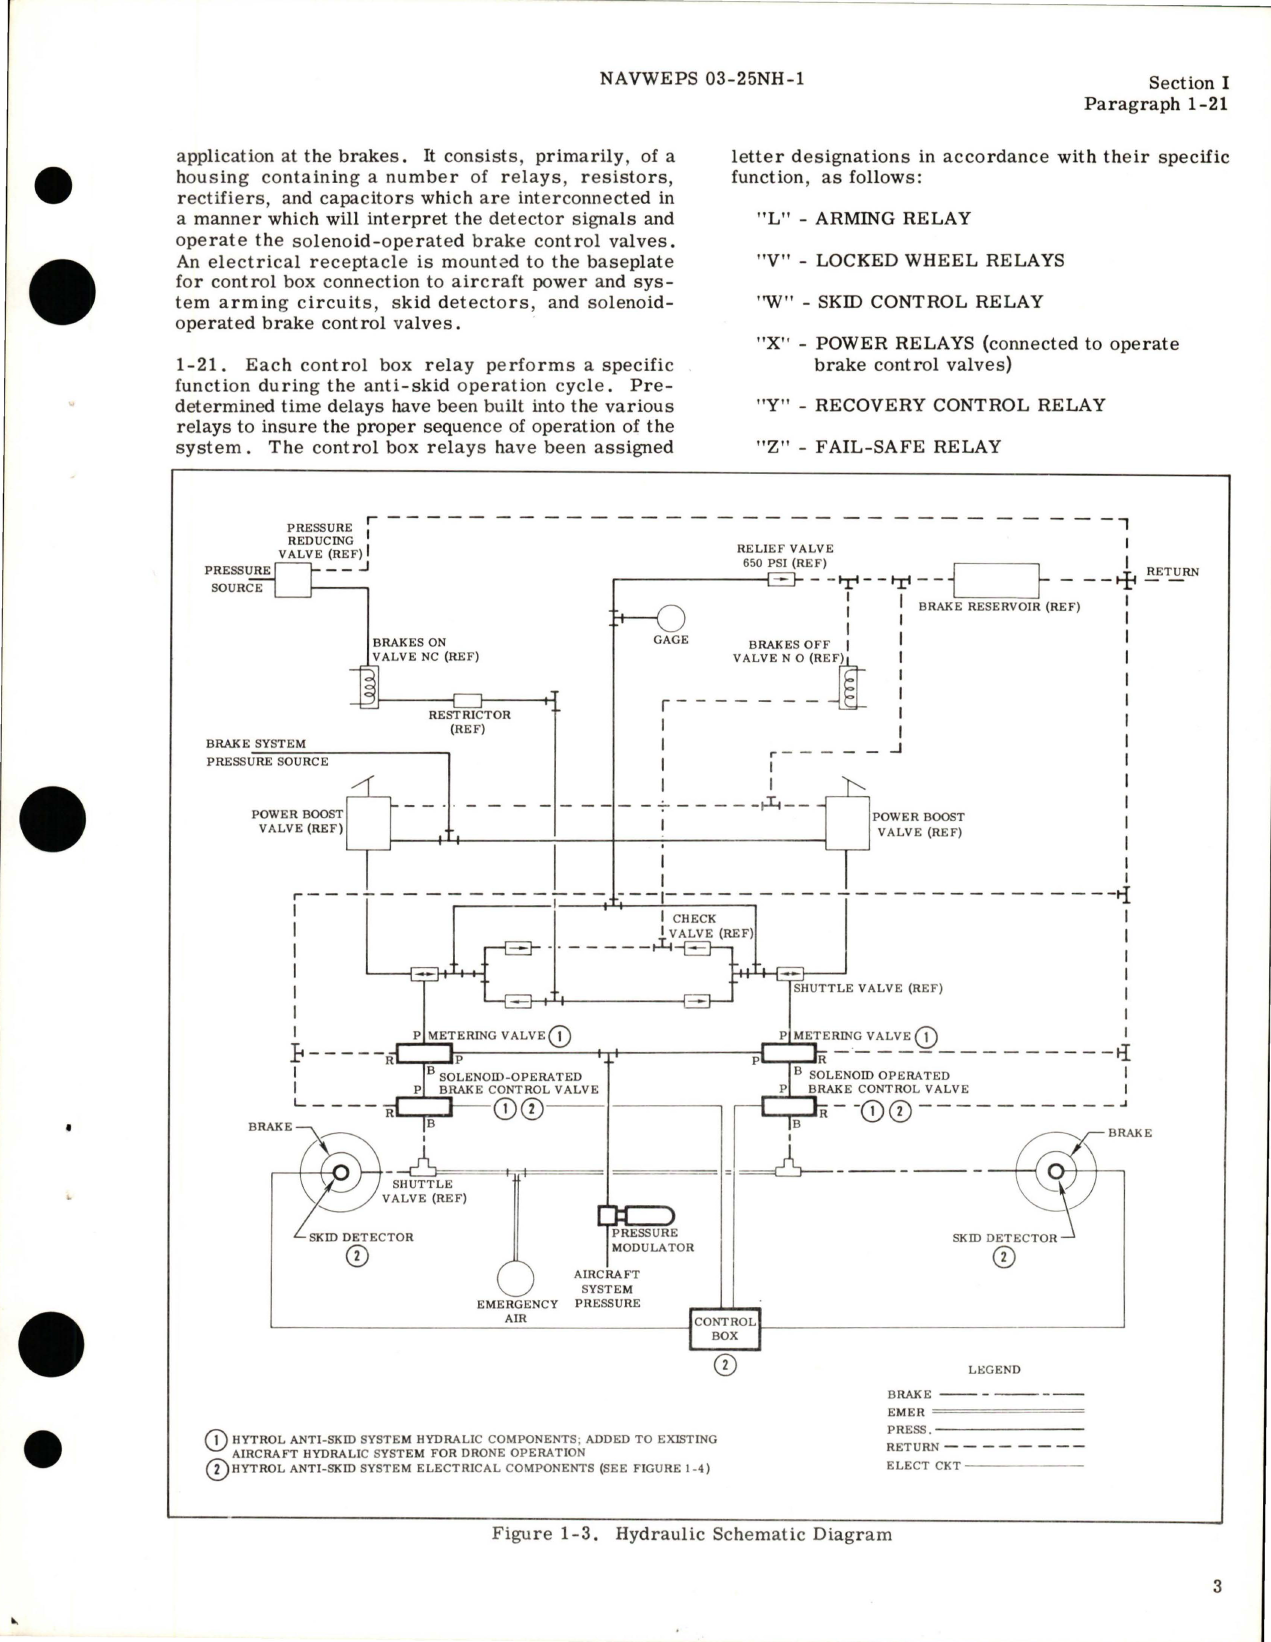 Sample page 7 from AirCorps Library document: Operation and Maintenance Instructions for Hytrol Anti-Skid Braking System - Part 00-215